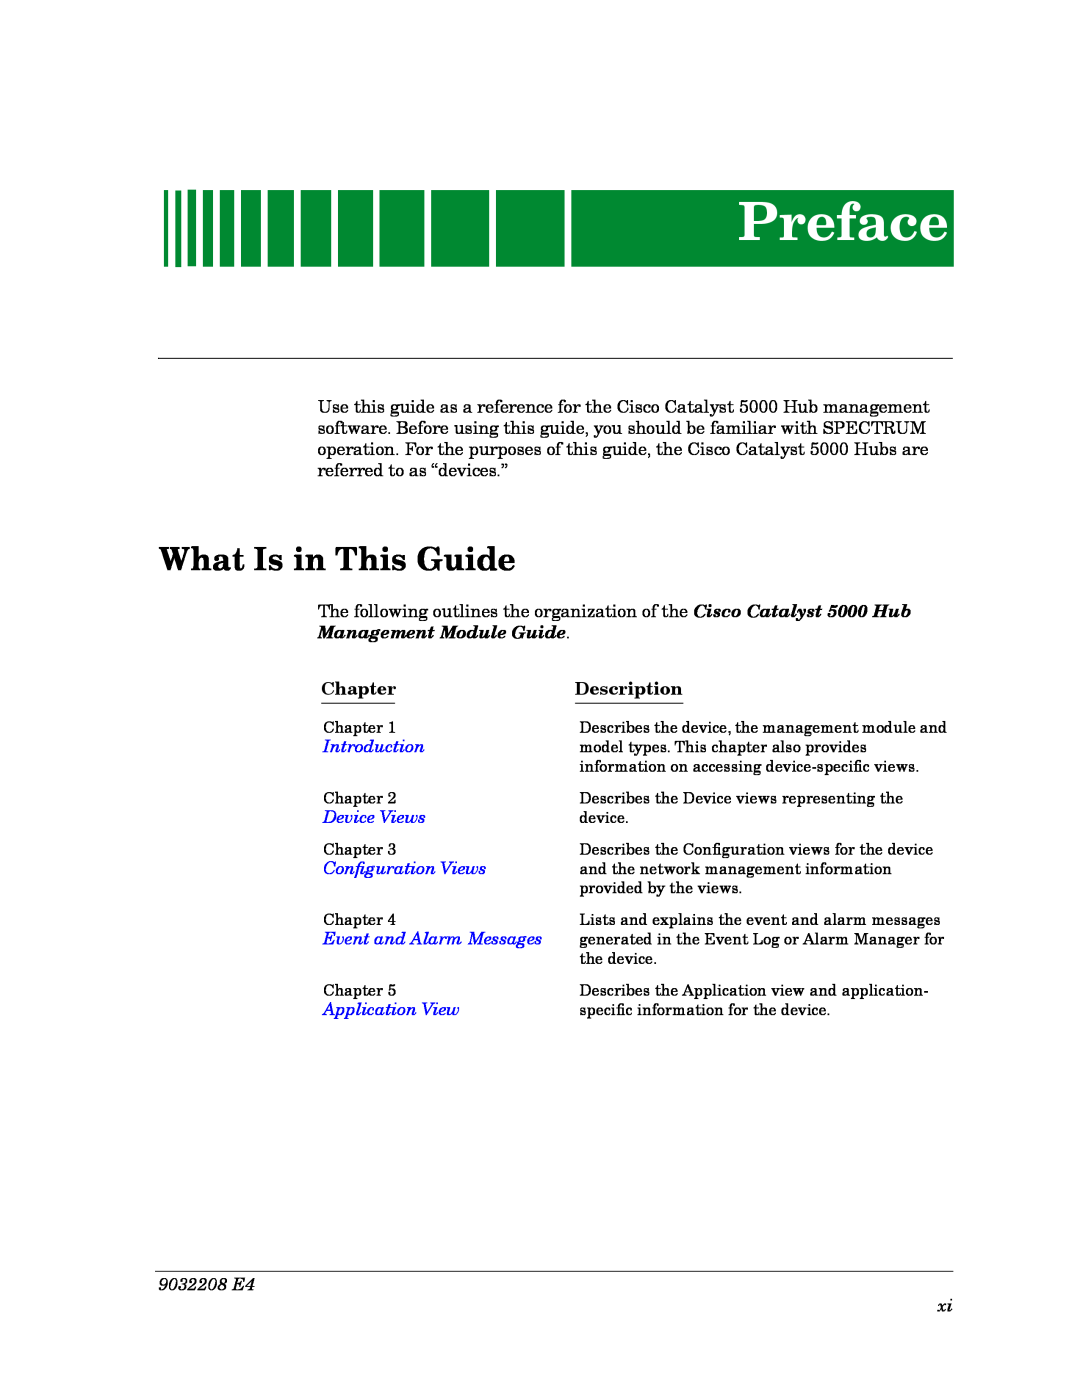 Cabletron Systems 5000, 5500 Preface, What Is in This Guide, Management Module Guide, Chapter, Description, Introduction 